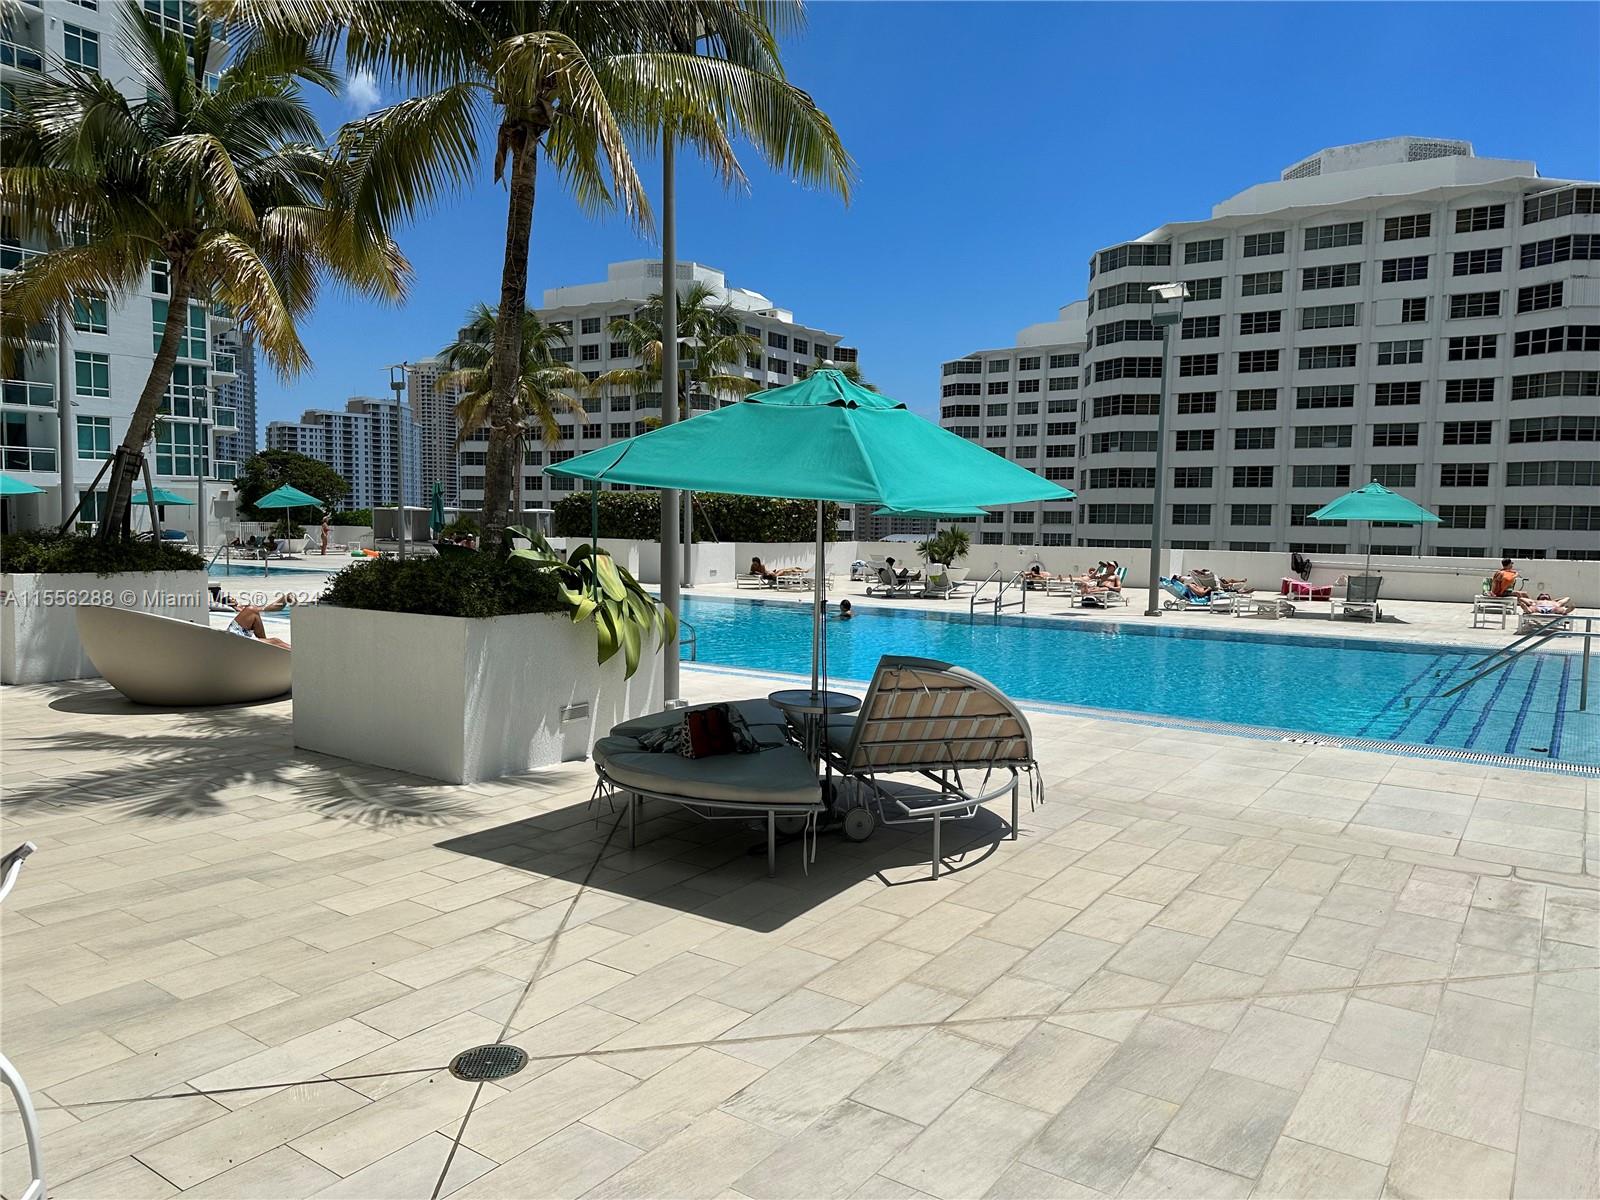 951 Brickell Ave 1500, Miami, Florida 33131, 1 Bedroom Bedrooms, ,1 BathroomBathrooms,Residentiallease,For Rent,951 Brickell Ave 1500,A11556288